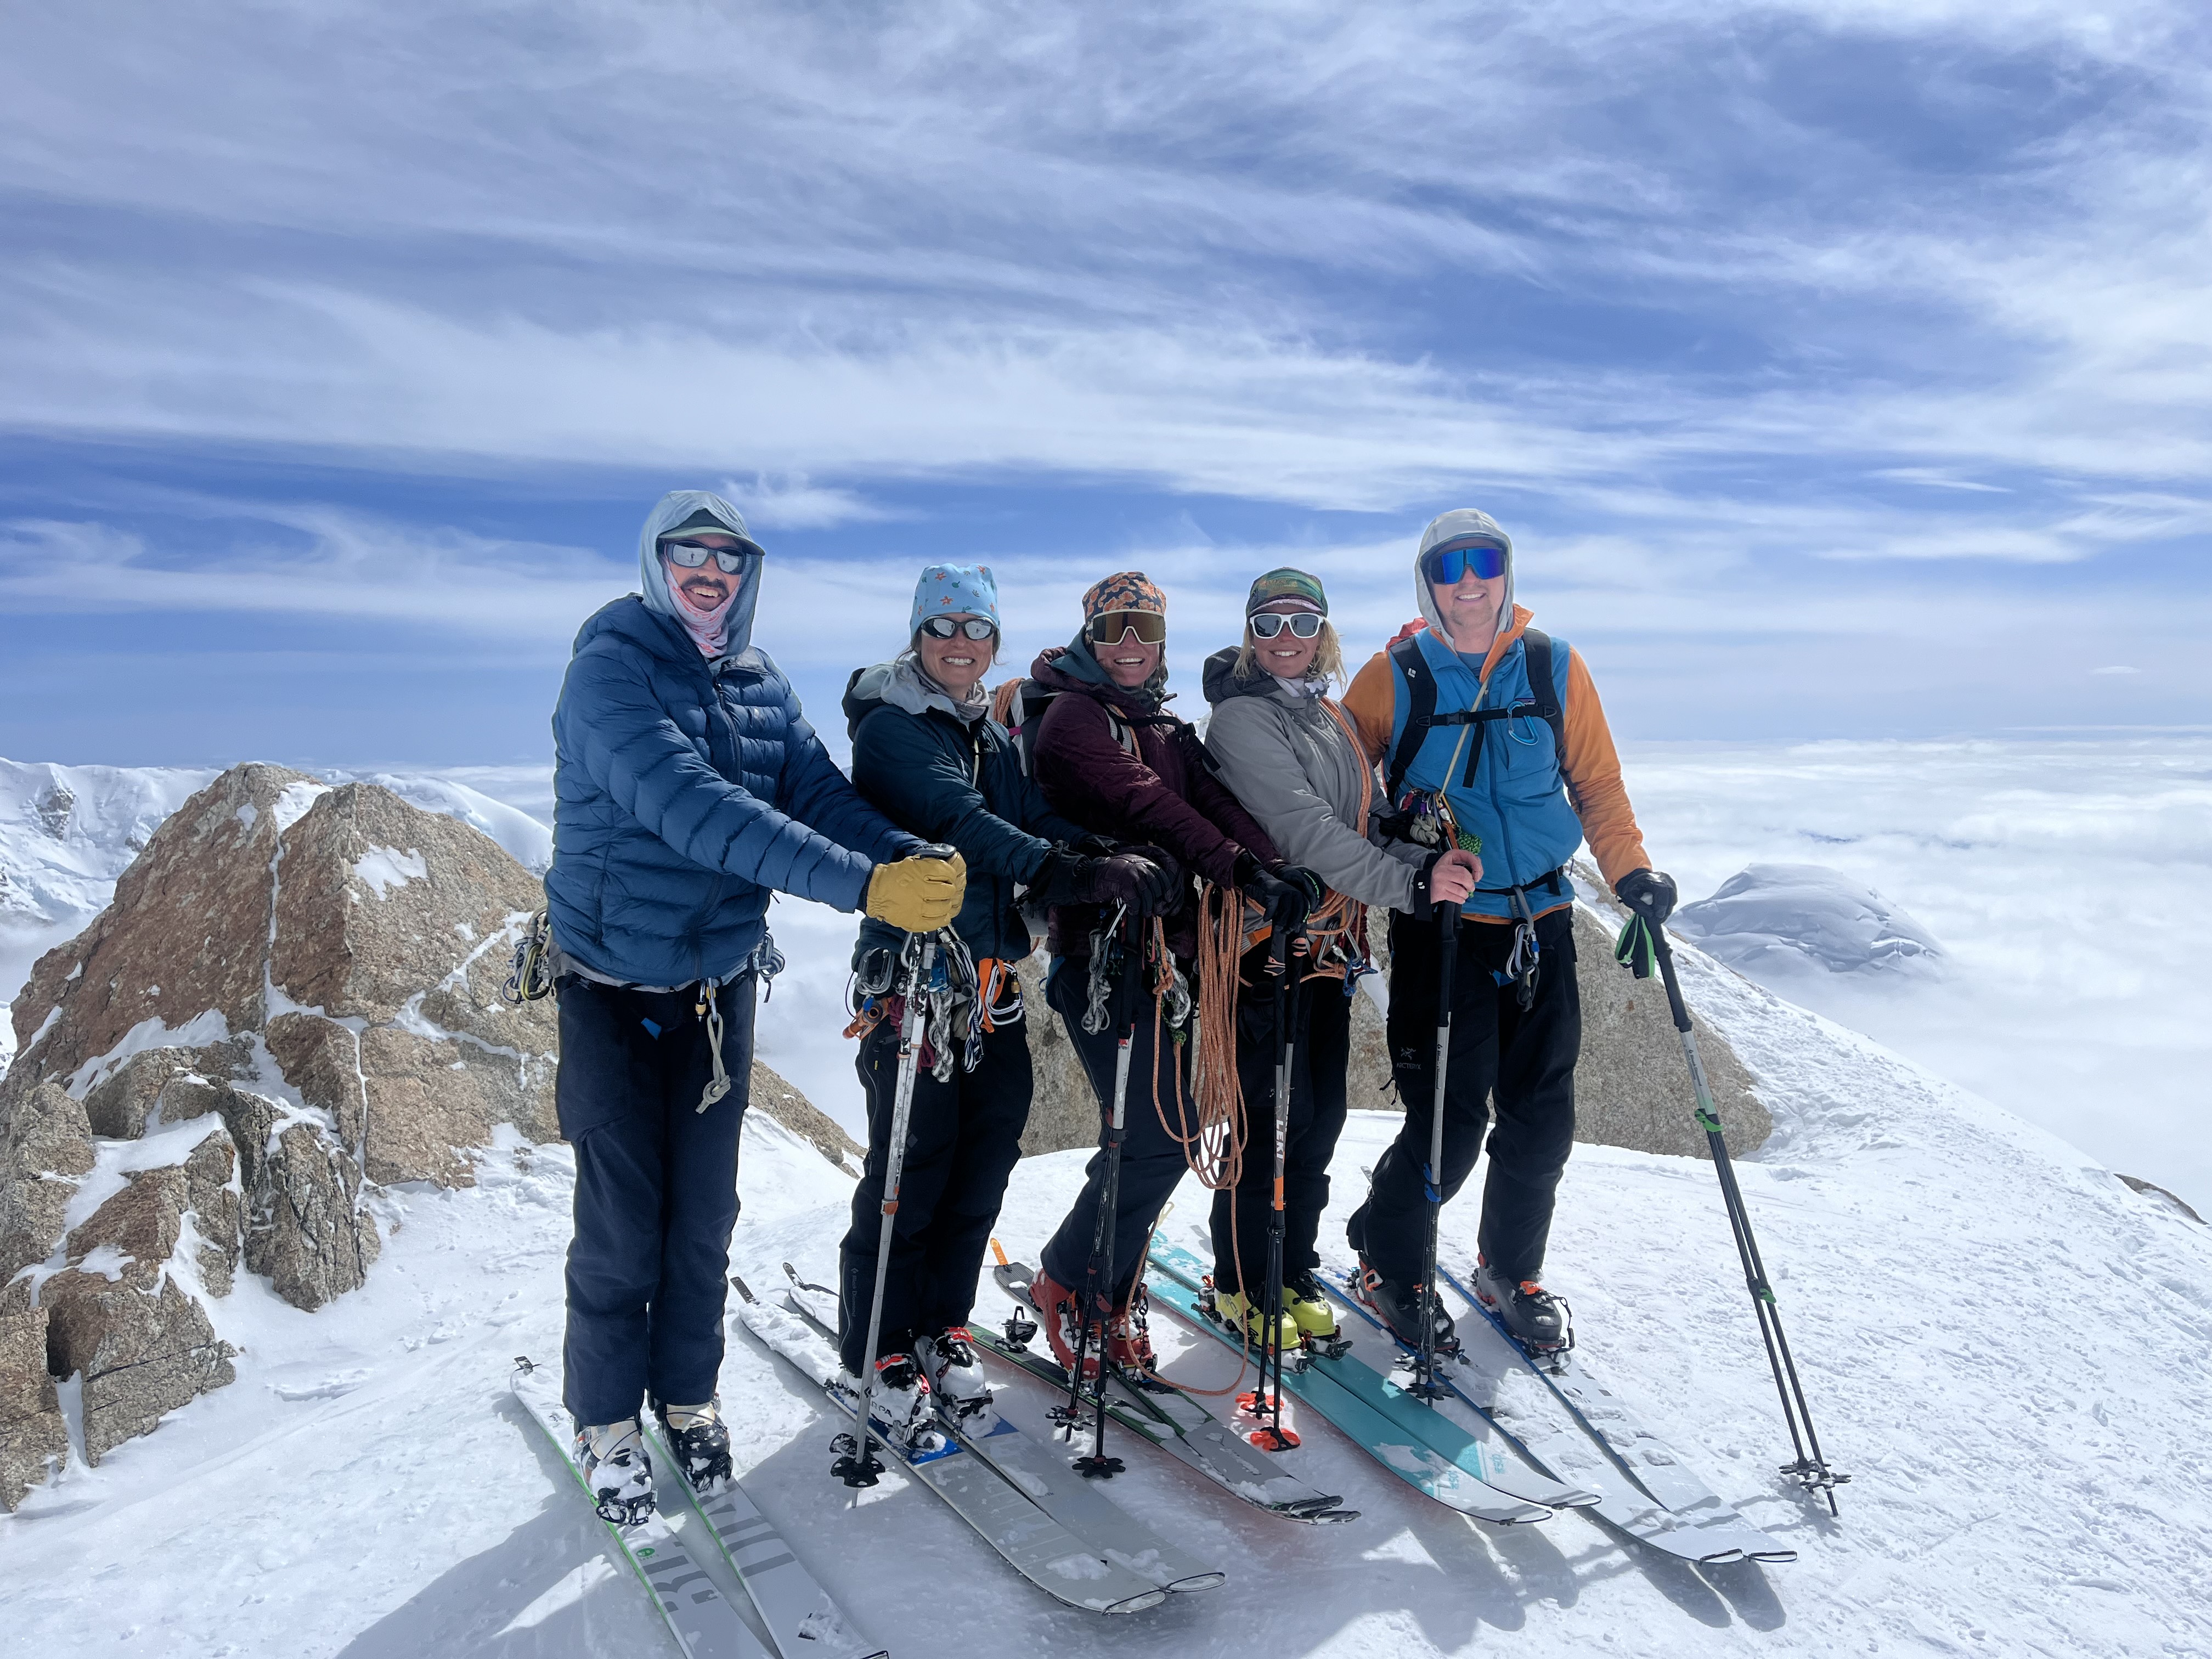 A line up of five skiers pose on a mountain ridge